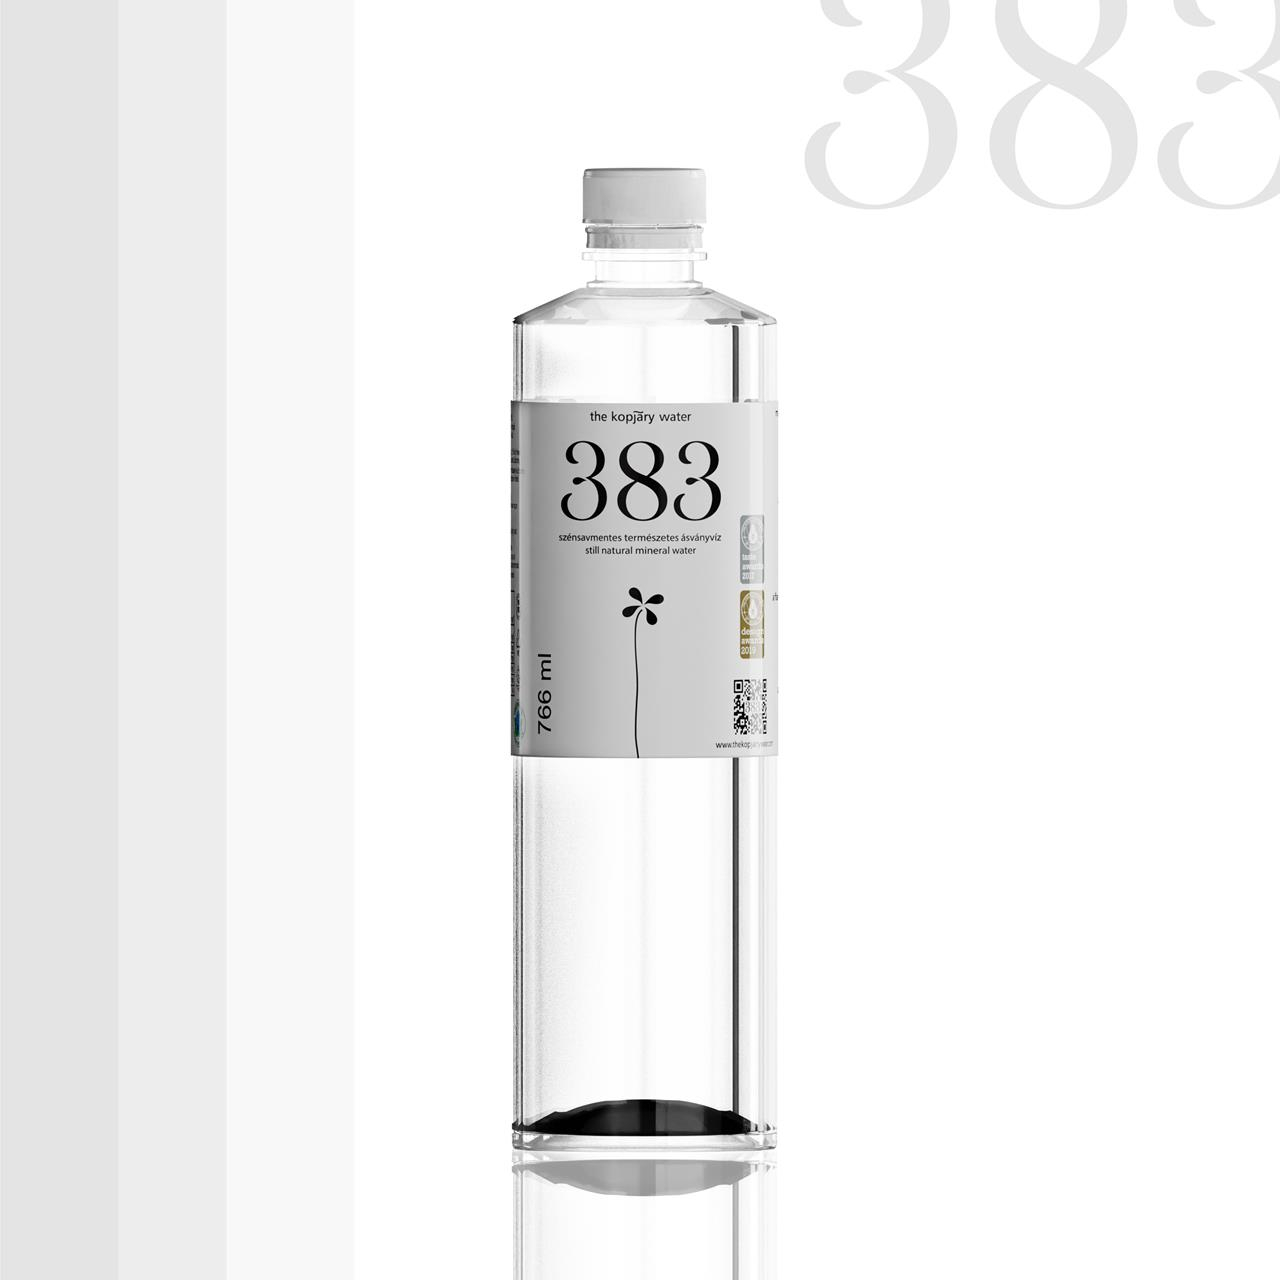 383 THE KOPJARY WATER, 766 ml